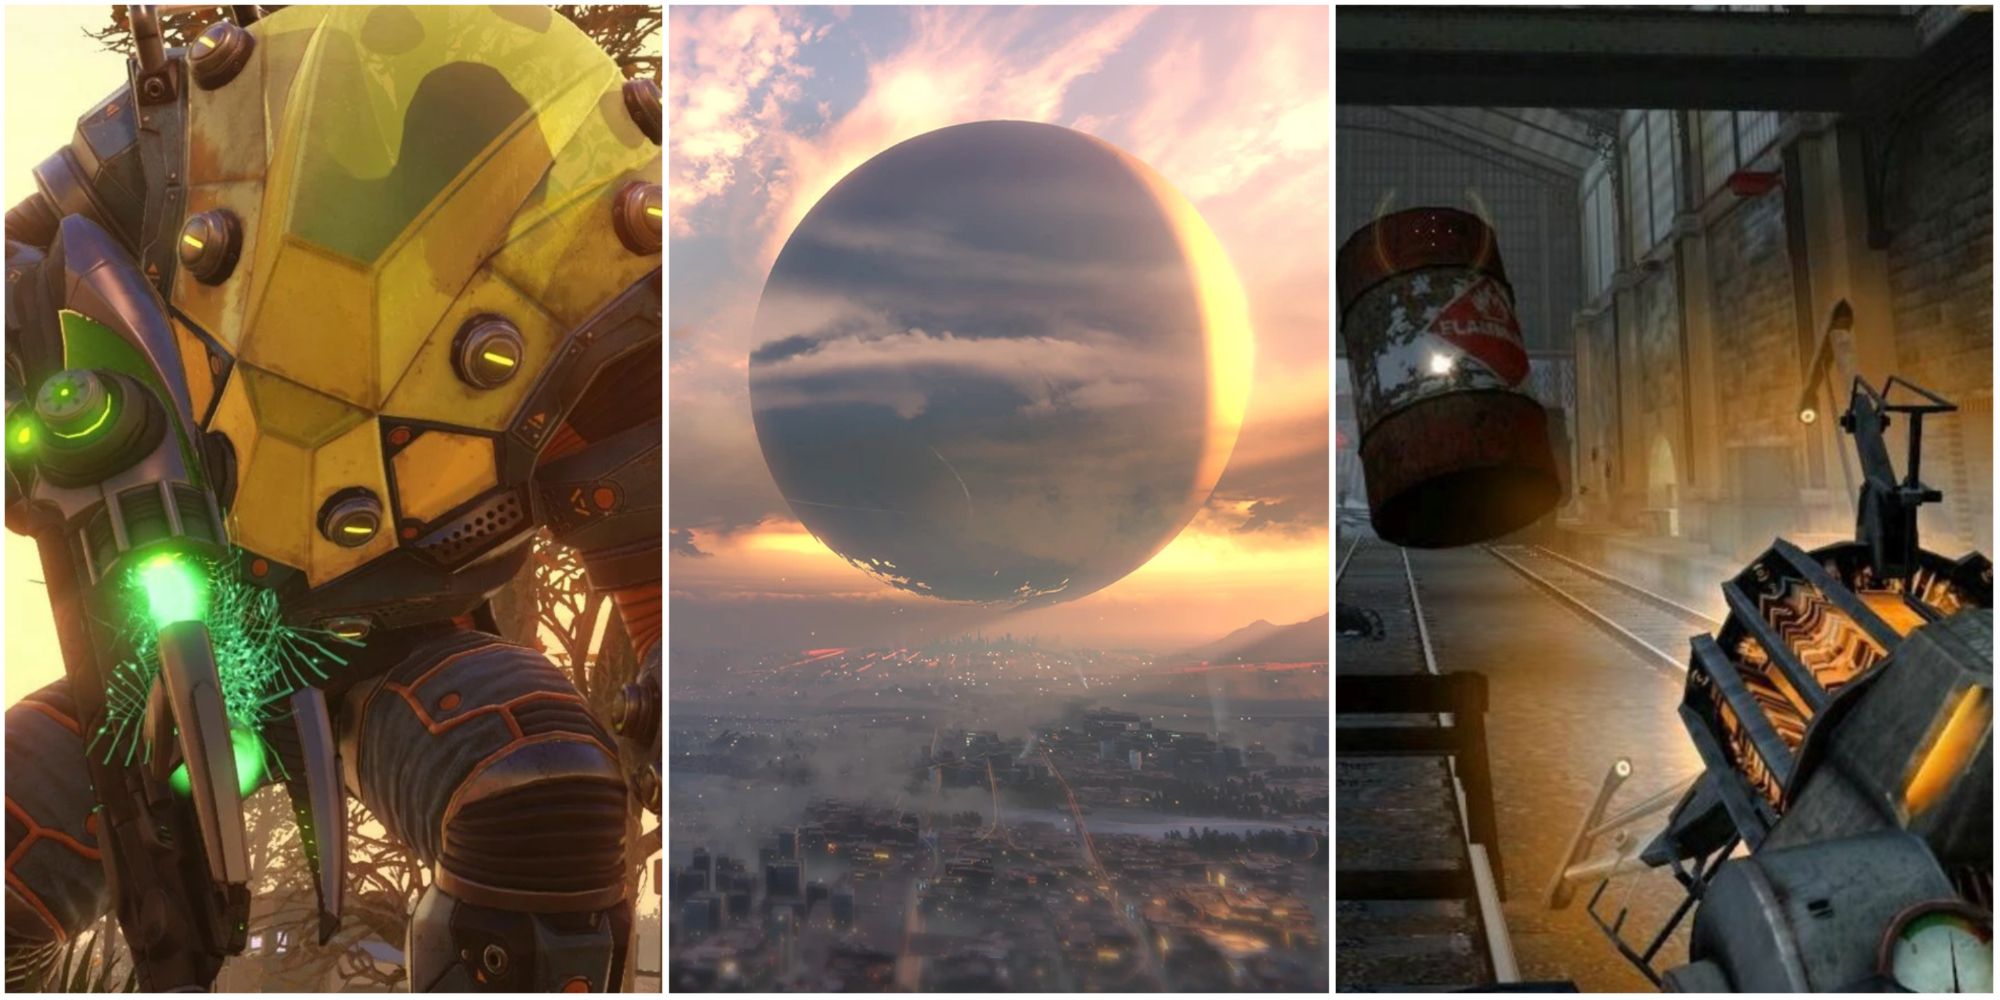 Collage of the Coolest Alien Technology In Games, including XCOM 2, Destiny 2 and Half-Life 2